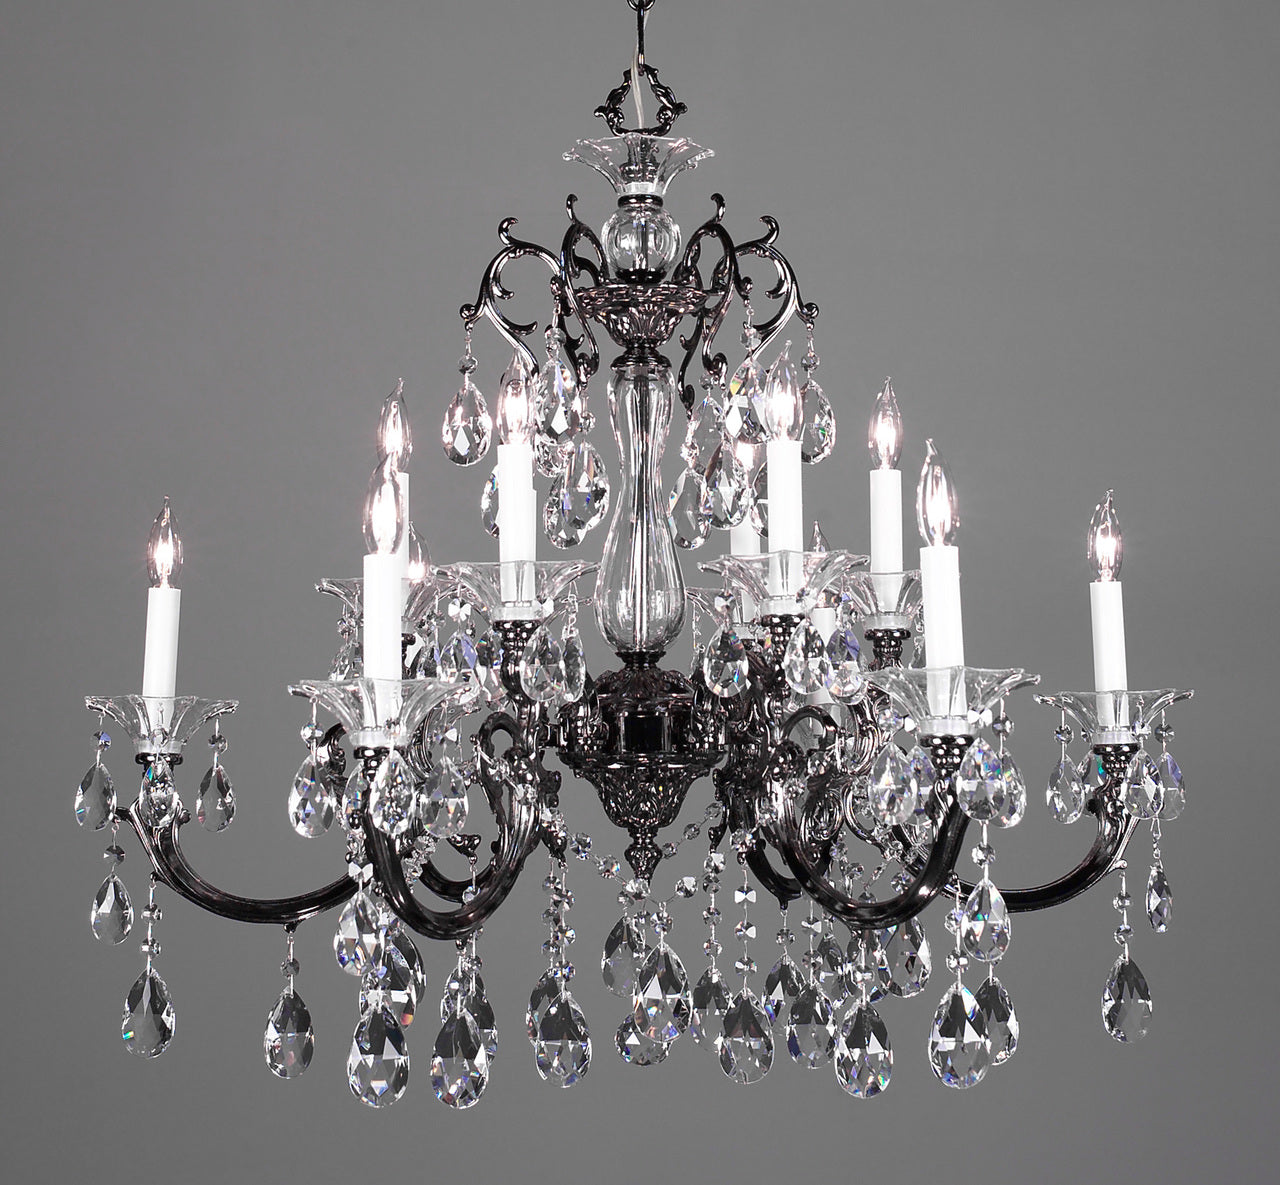 Classic Lighting 57063 CHP SJT Via Lombardi Crystal Chandelier in Champagne Pearl (Imported from Spain)